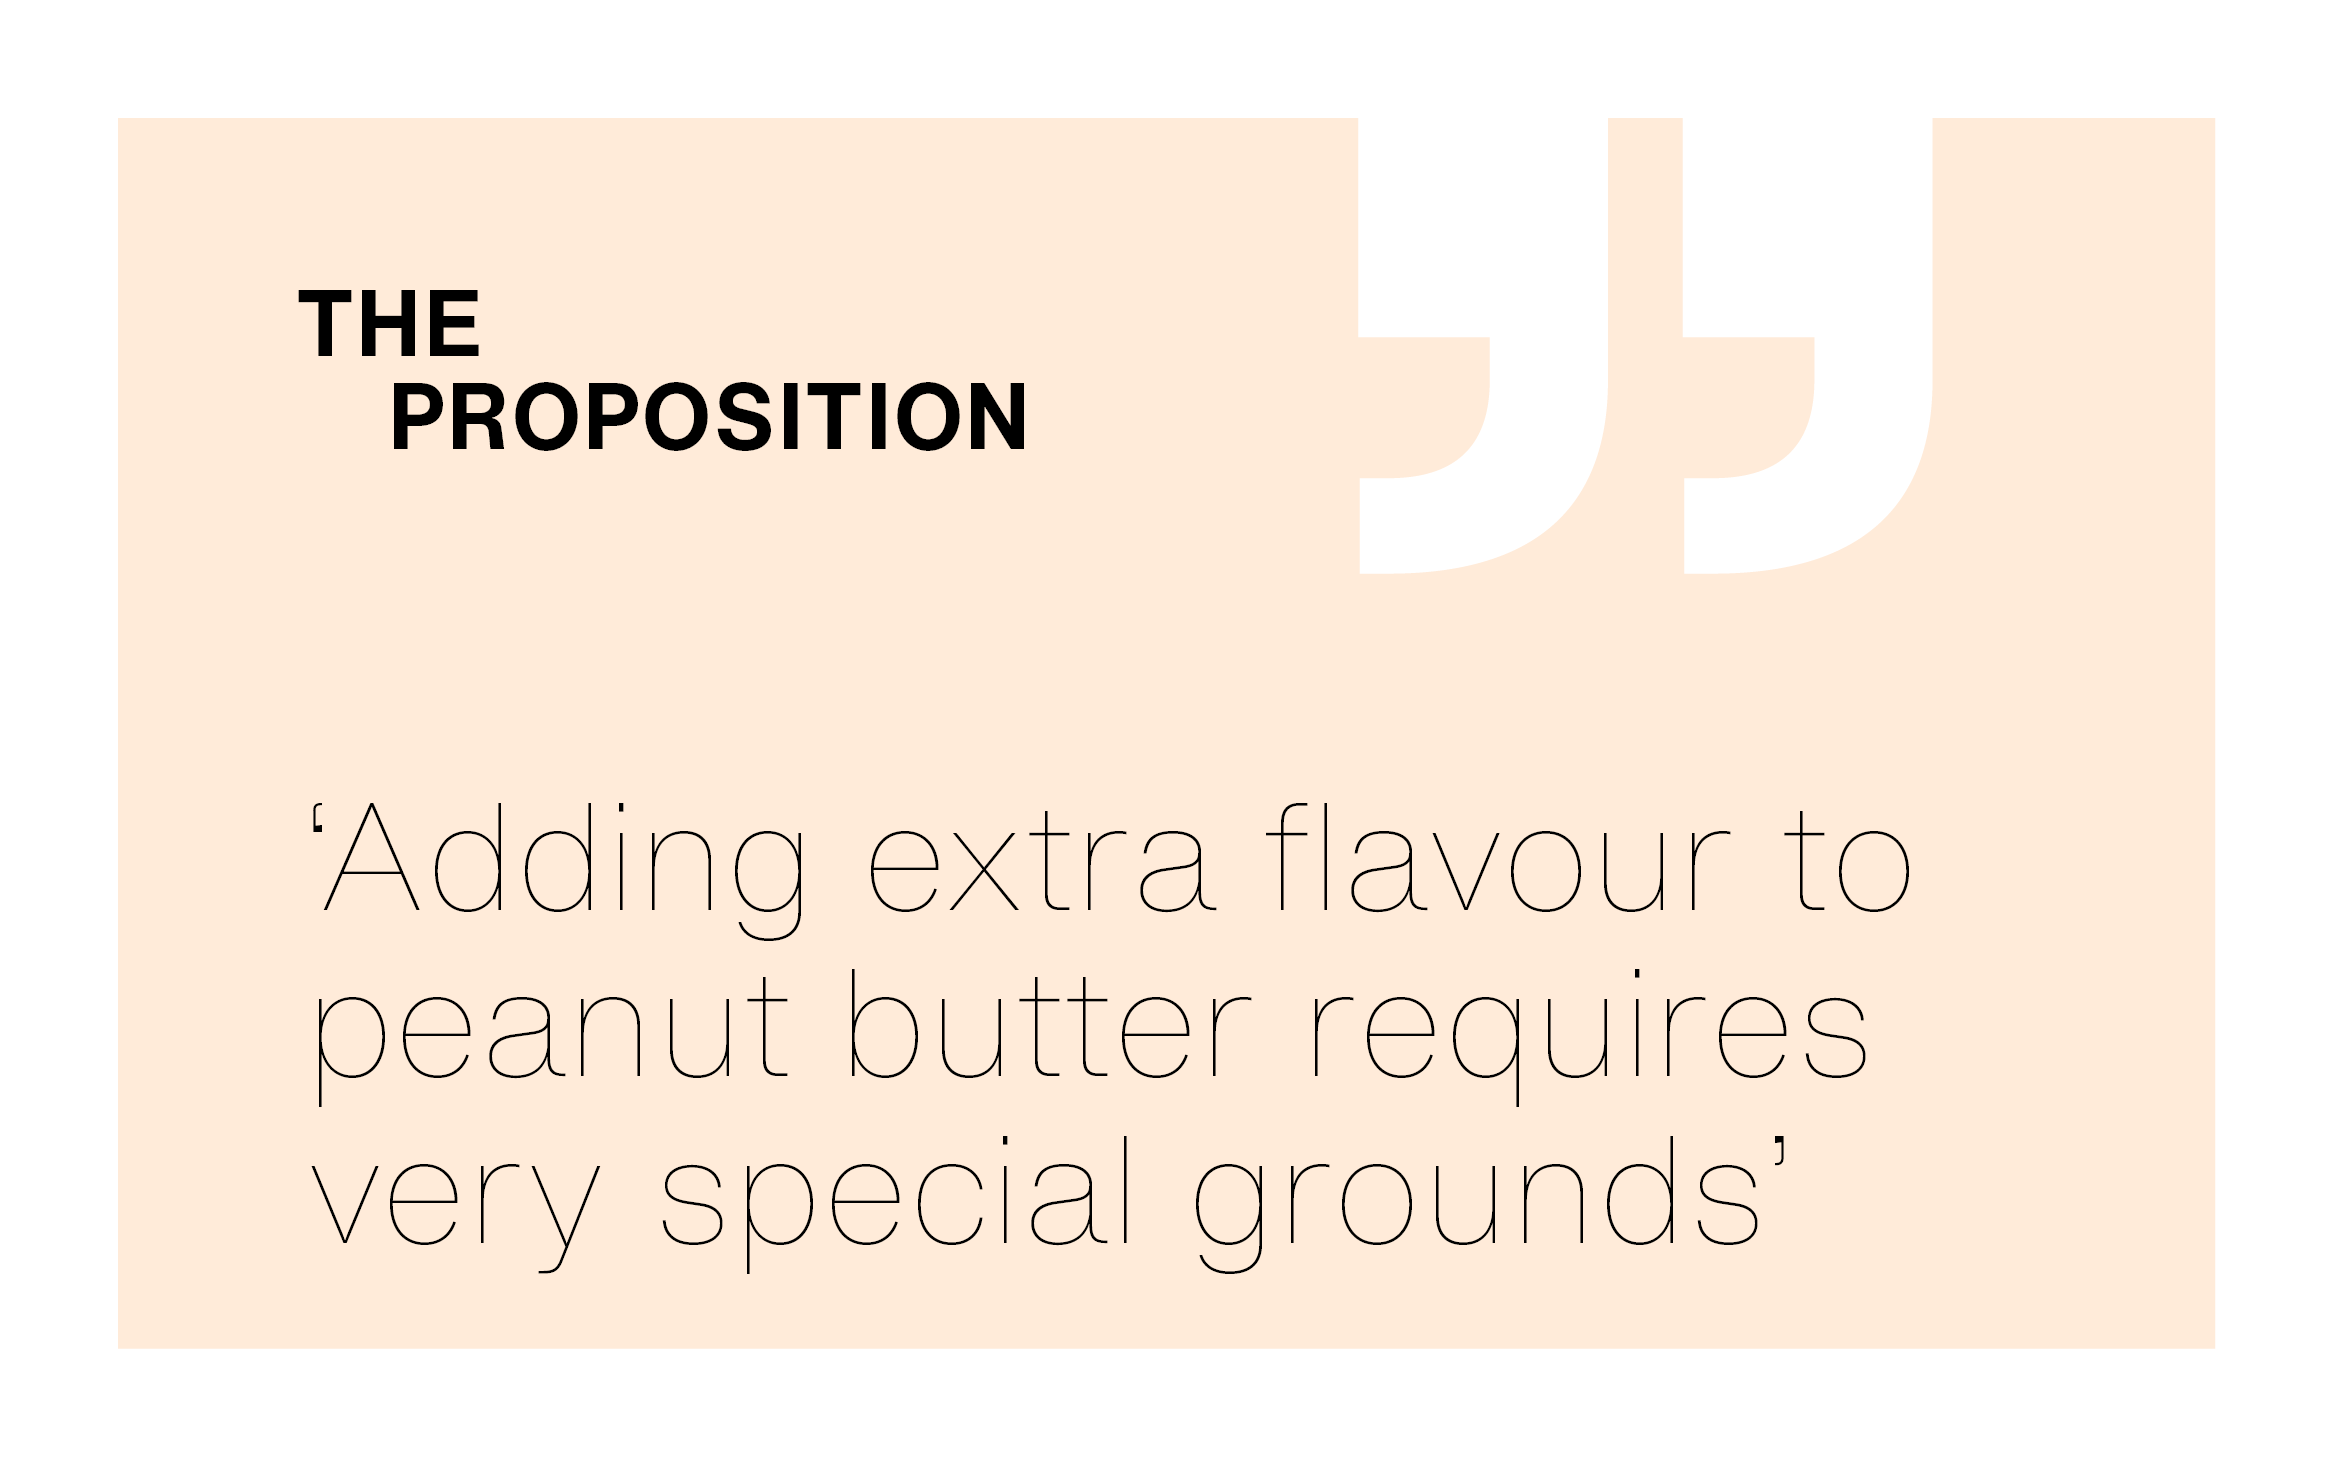 [The Proposition] ‘Adding extra flavour to peanut butter requires very special grounds’